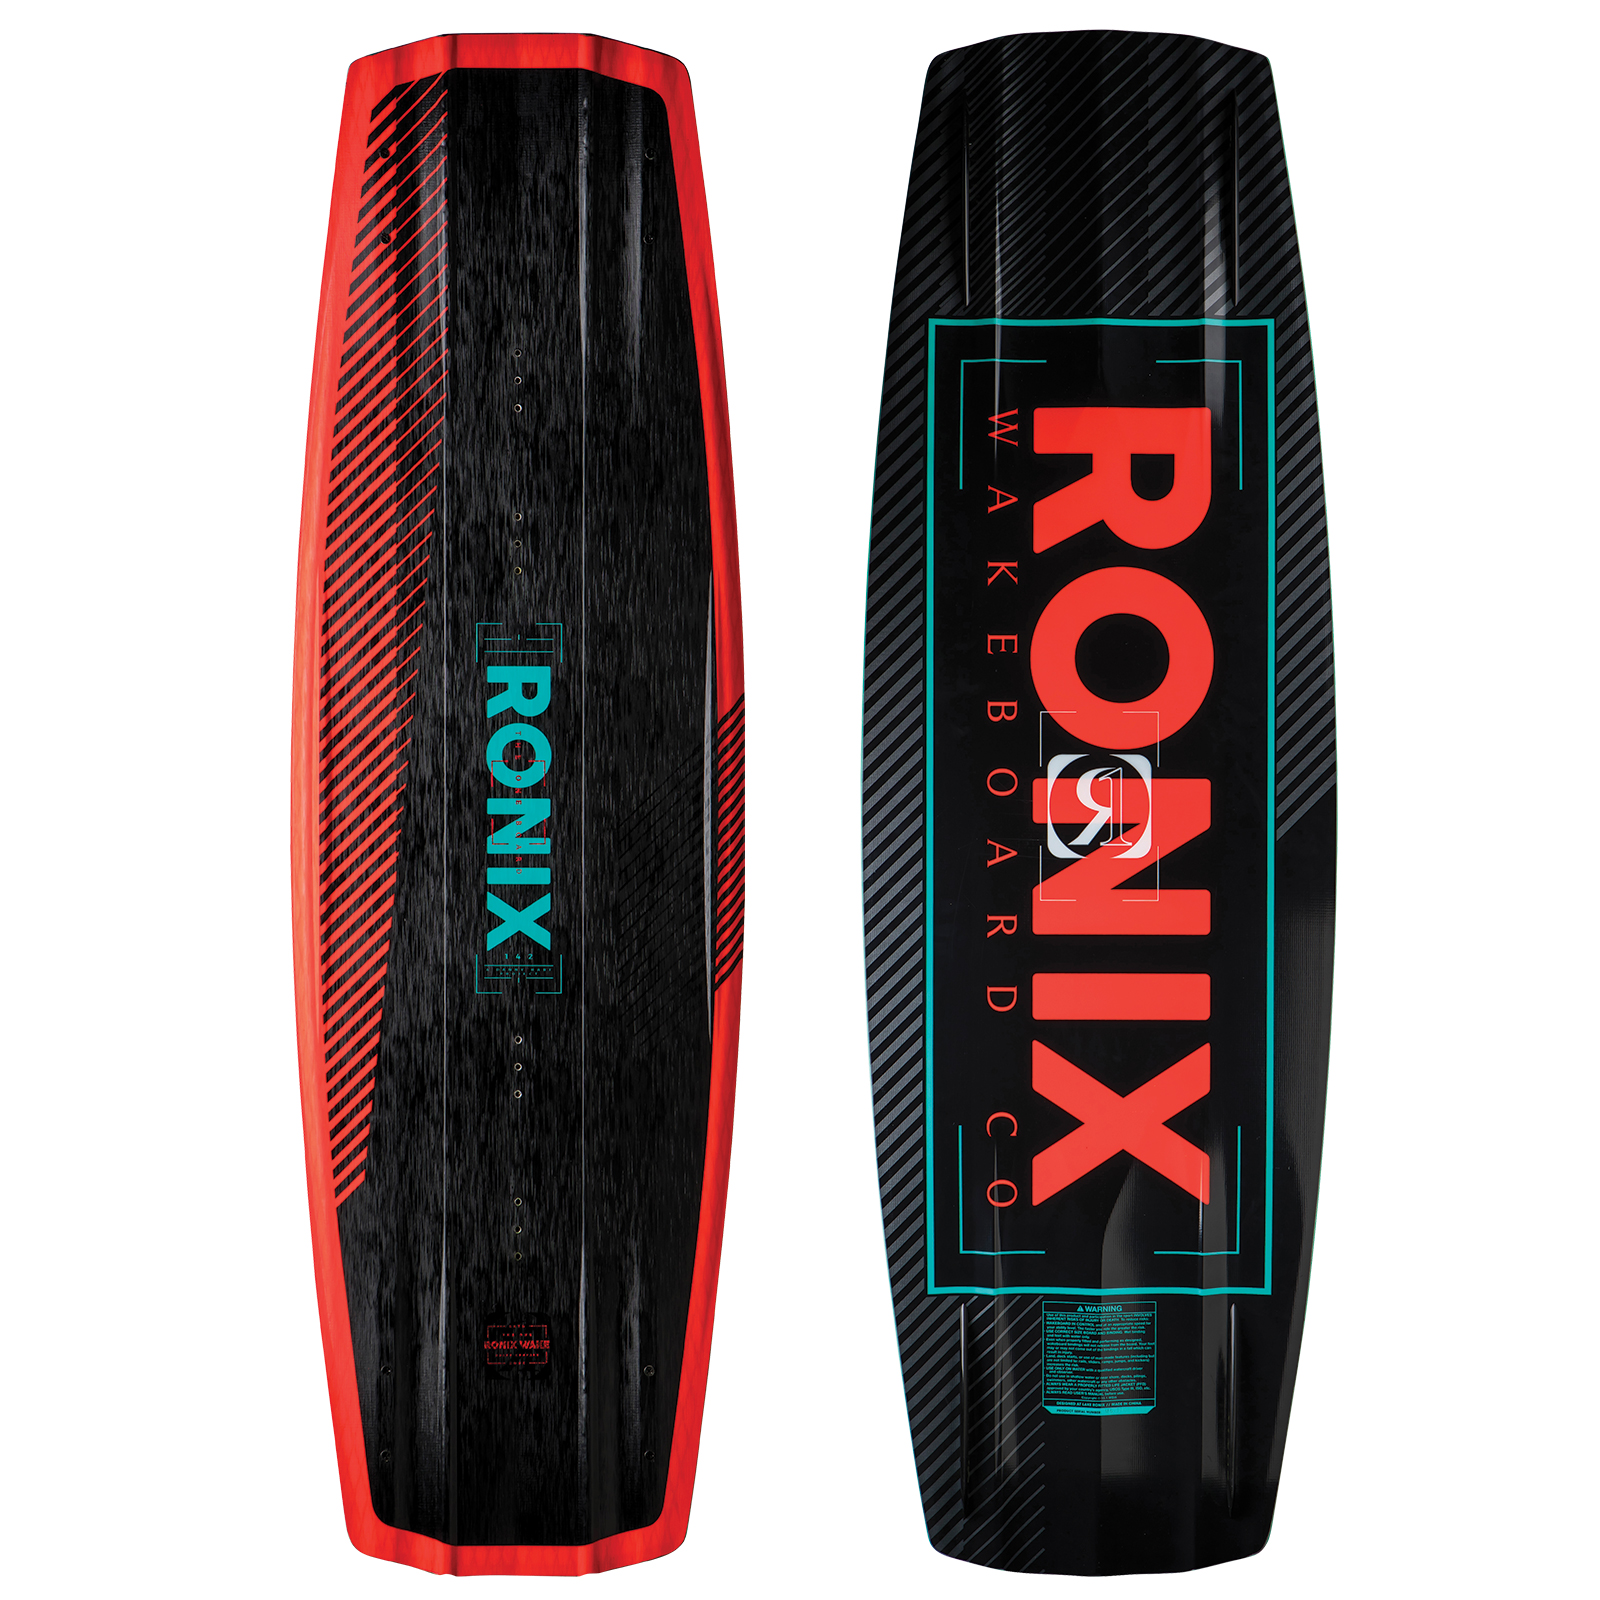   ONE ATR EDITION WAKEBOARD RONIX 2018